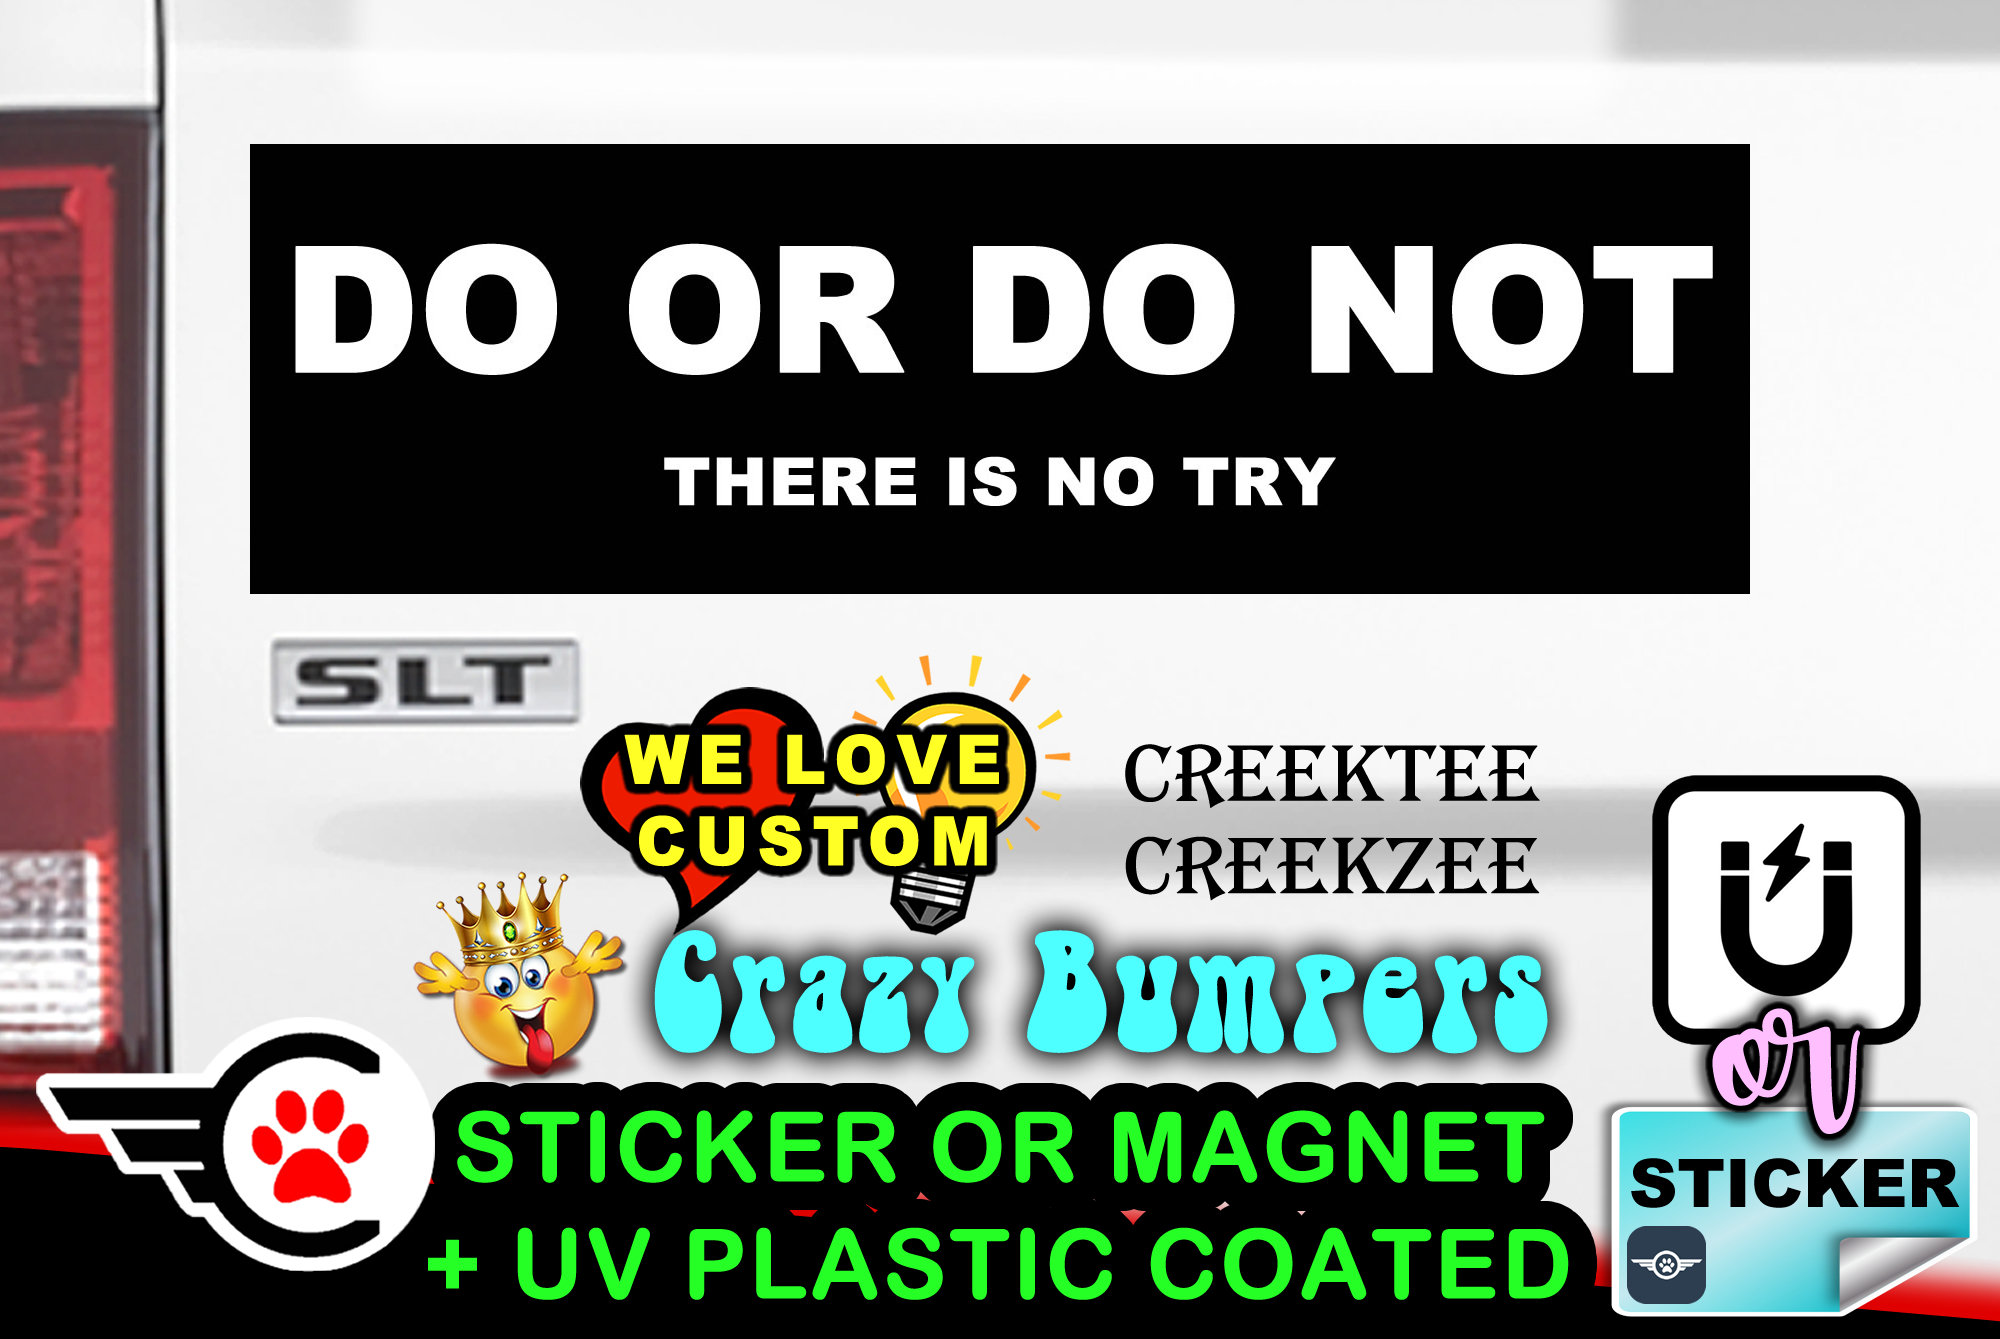 Do or do not there is no try - Bumper Sticker or Magnet sizes 4